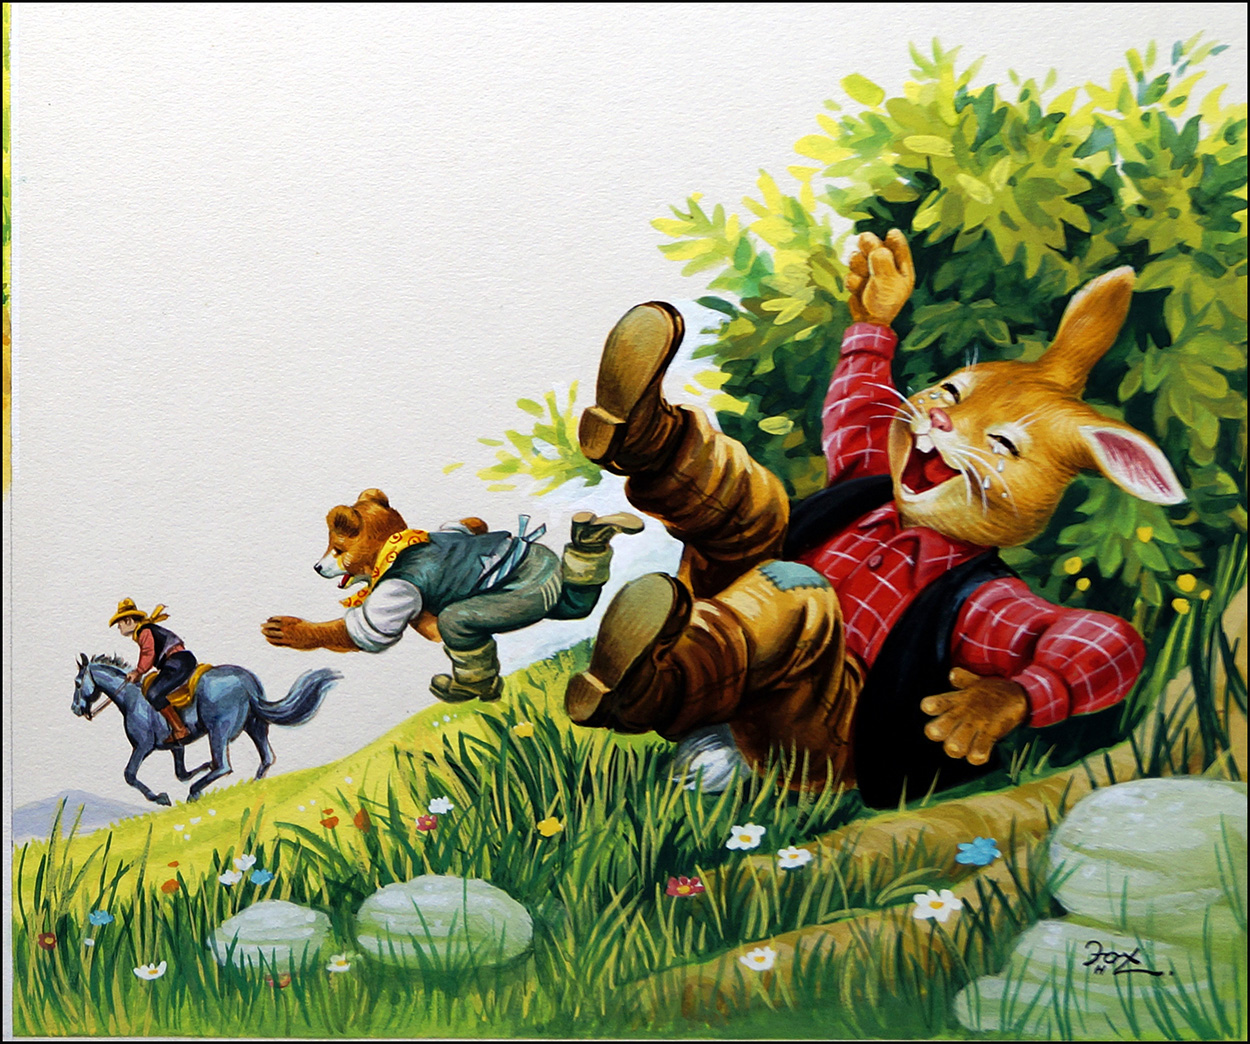 Brer Rabbit: He Went Tat-A-Way (Original) (Signed) art by Henry Fox at The Illustration Art Gallery